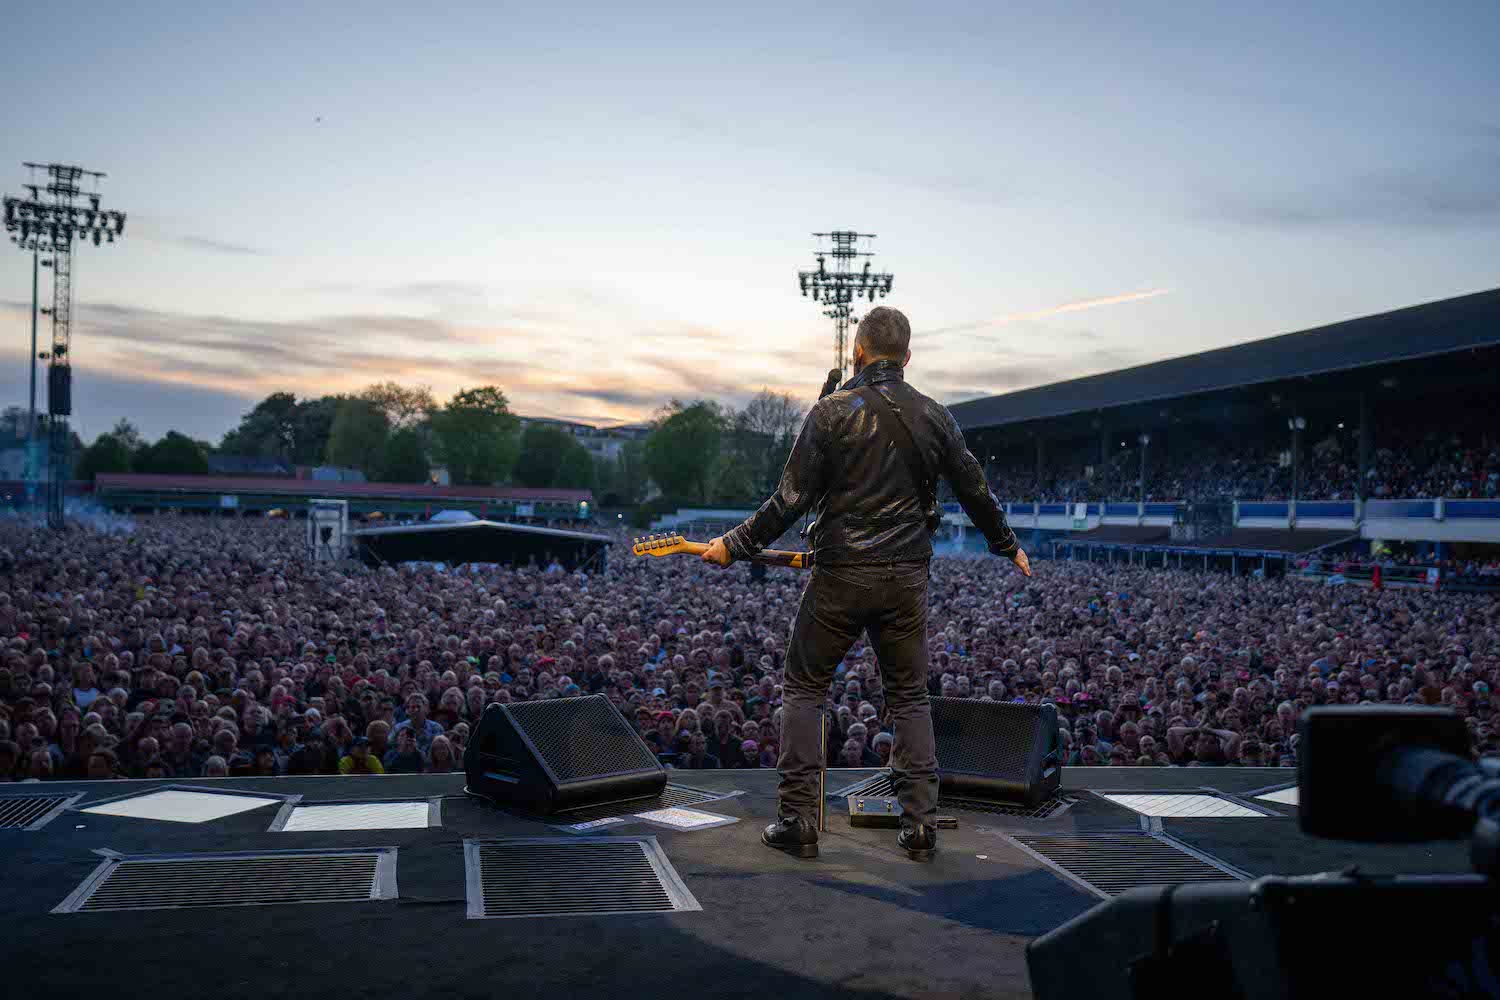 Bruce Springsteen & E Street Band at RDS Arena, Dublin, Ireland on May 9, 2023.